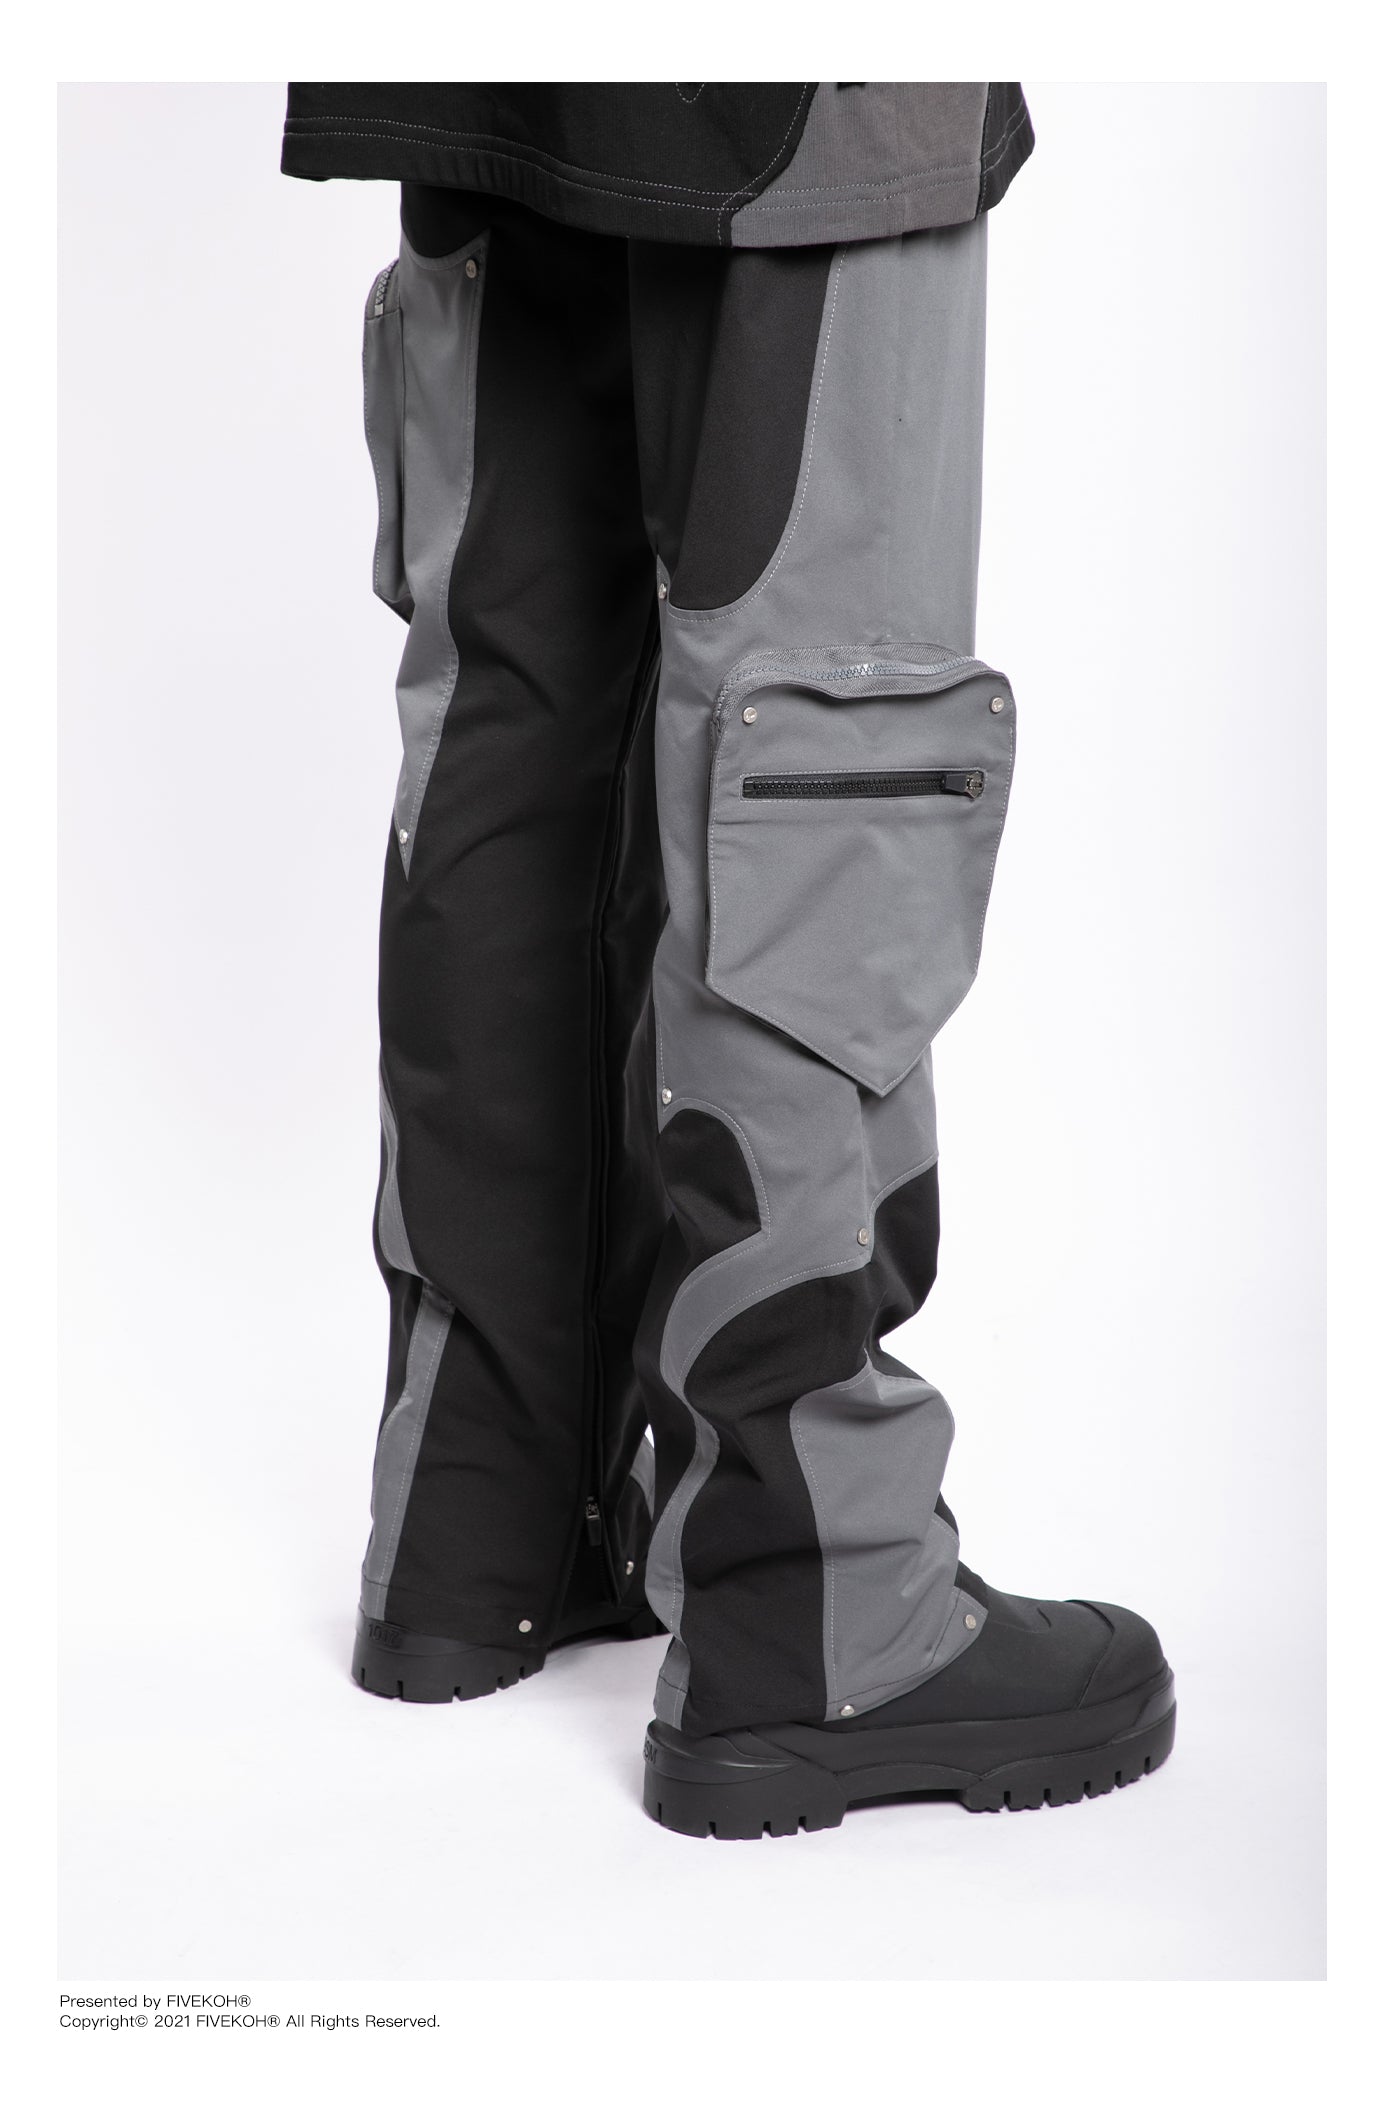 wikiwand NX-74205 concept casual trousers